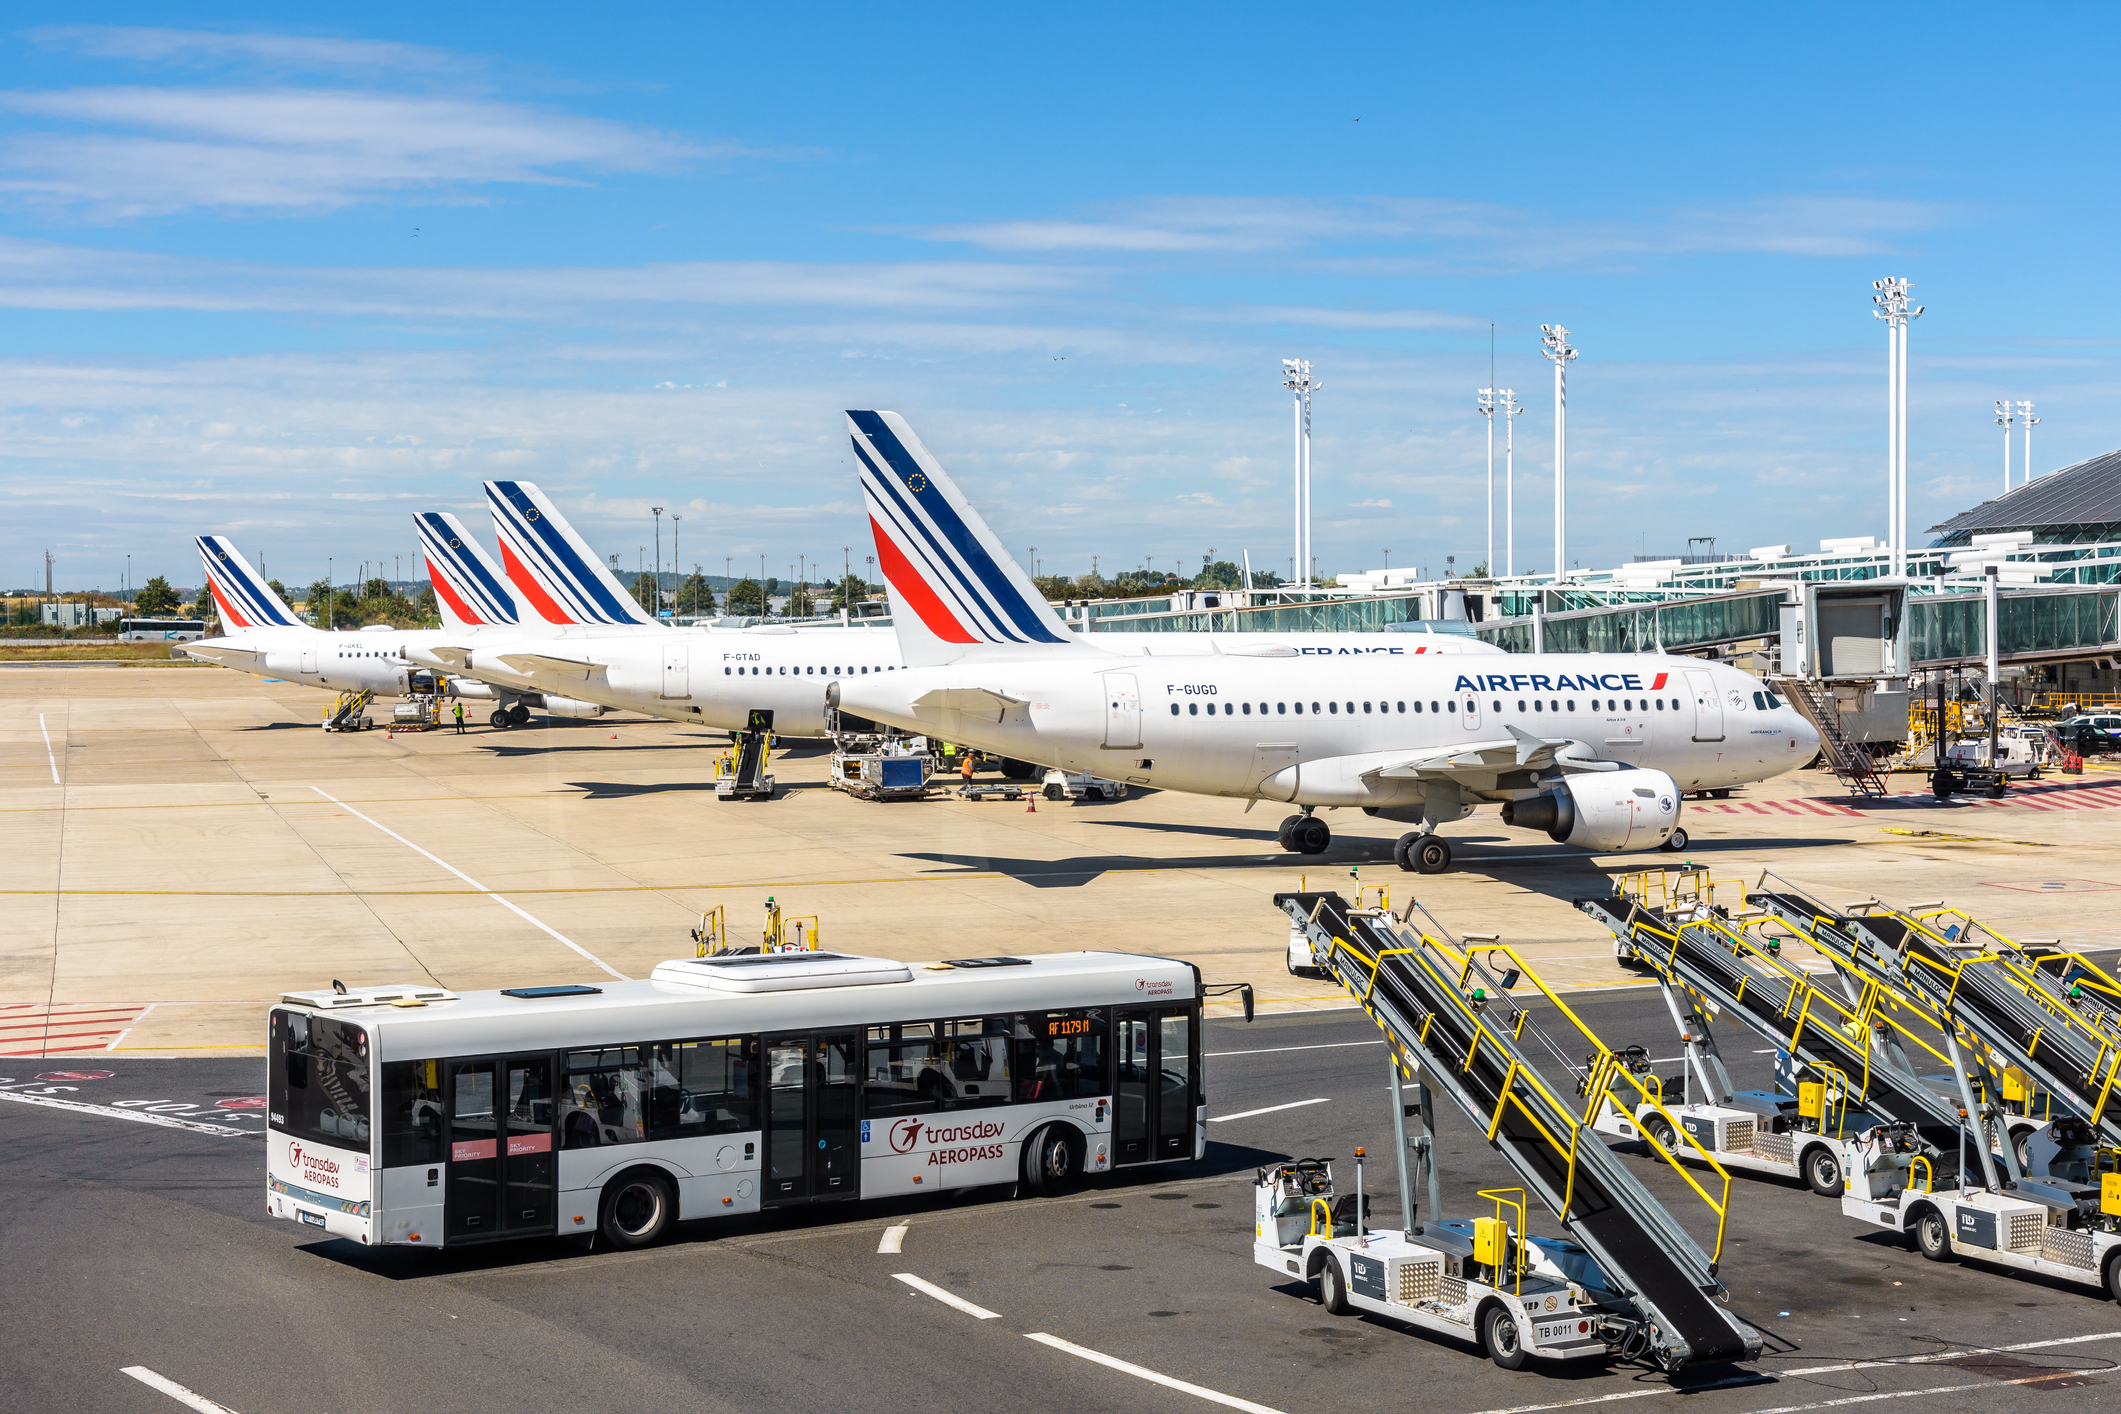 A row of Air France planes is parked side by side, in the foreground a bus brings passengers to the planes.